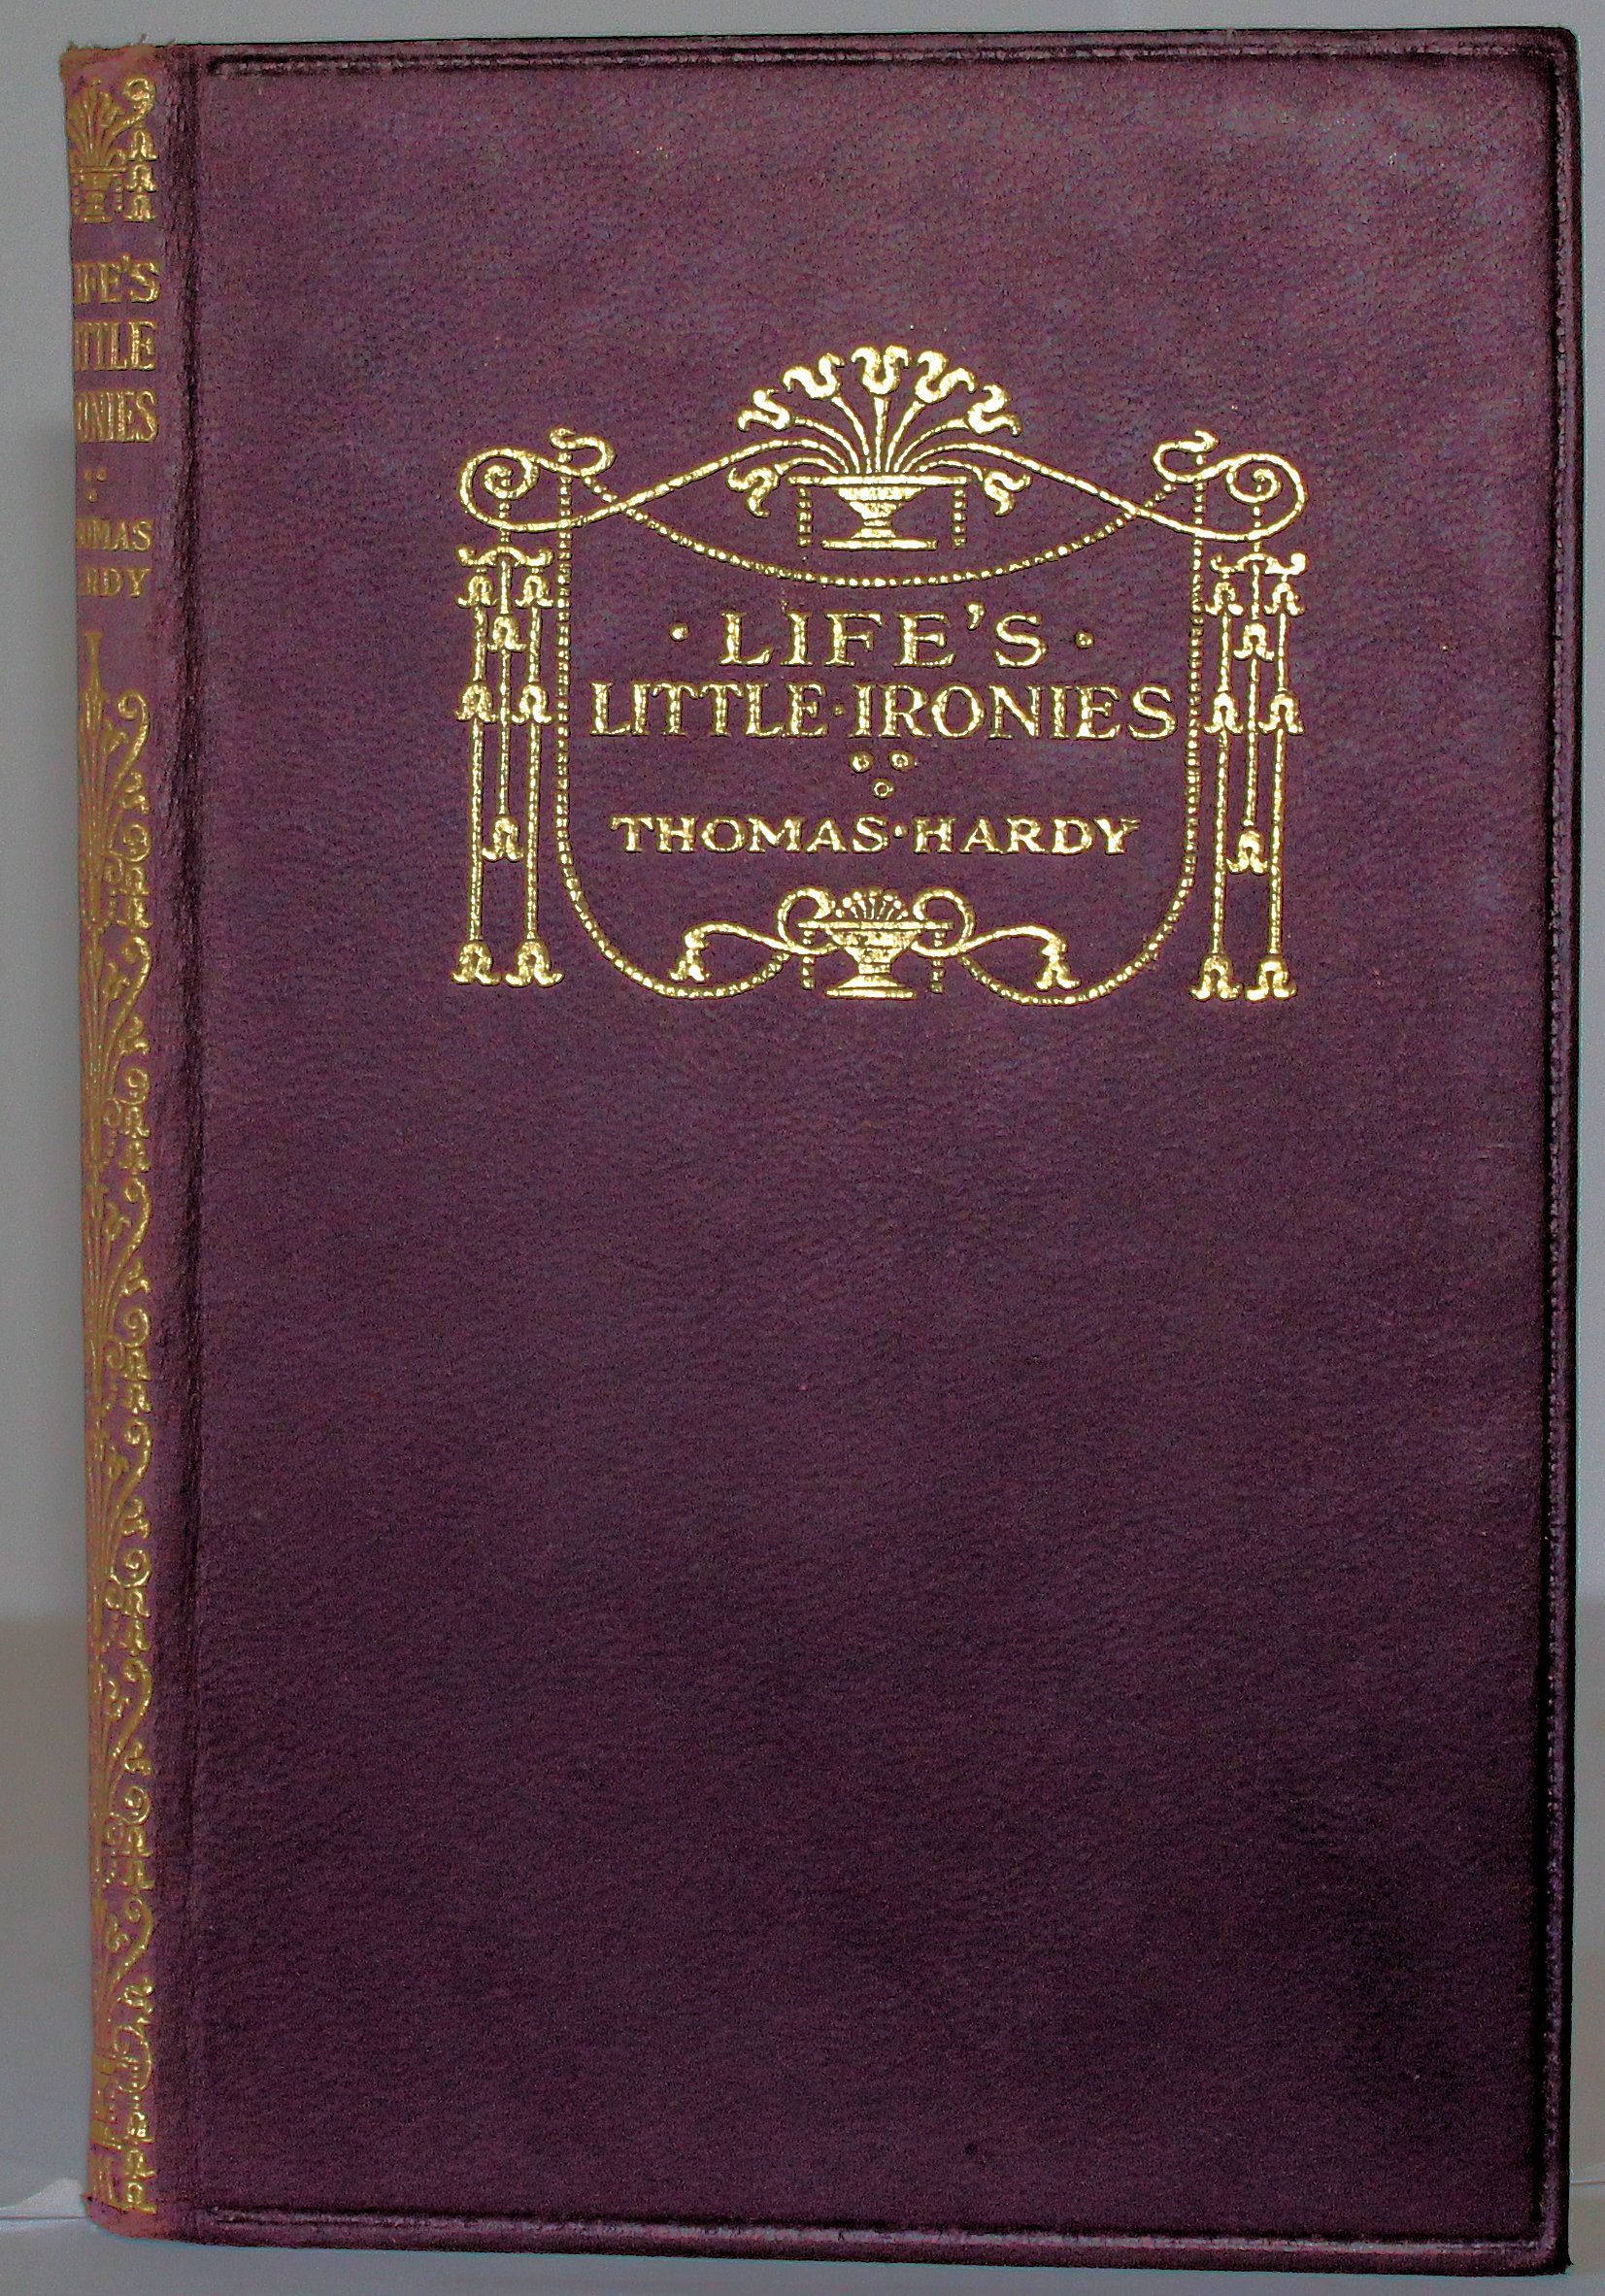 Life's Little Ironies. A set of Tales with some Colloquial Sketches entitled A Few Crusted Characters. - Thomas Hardy